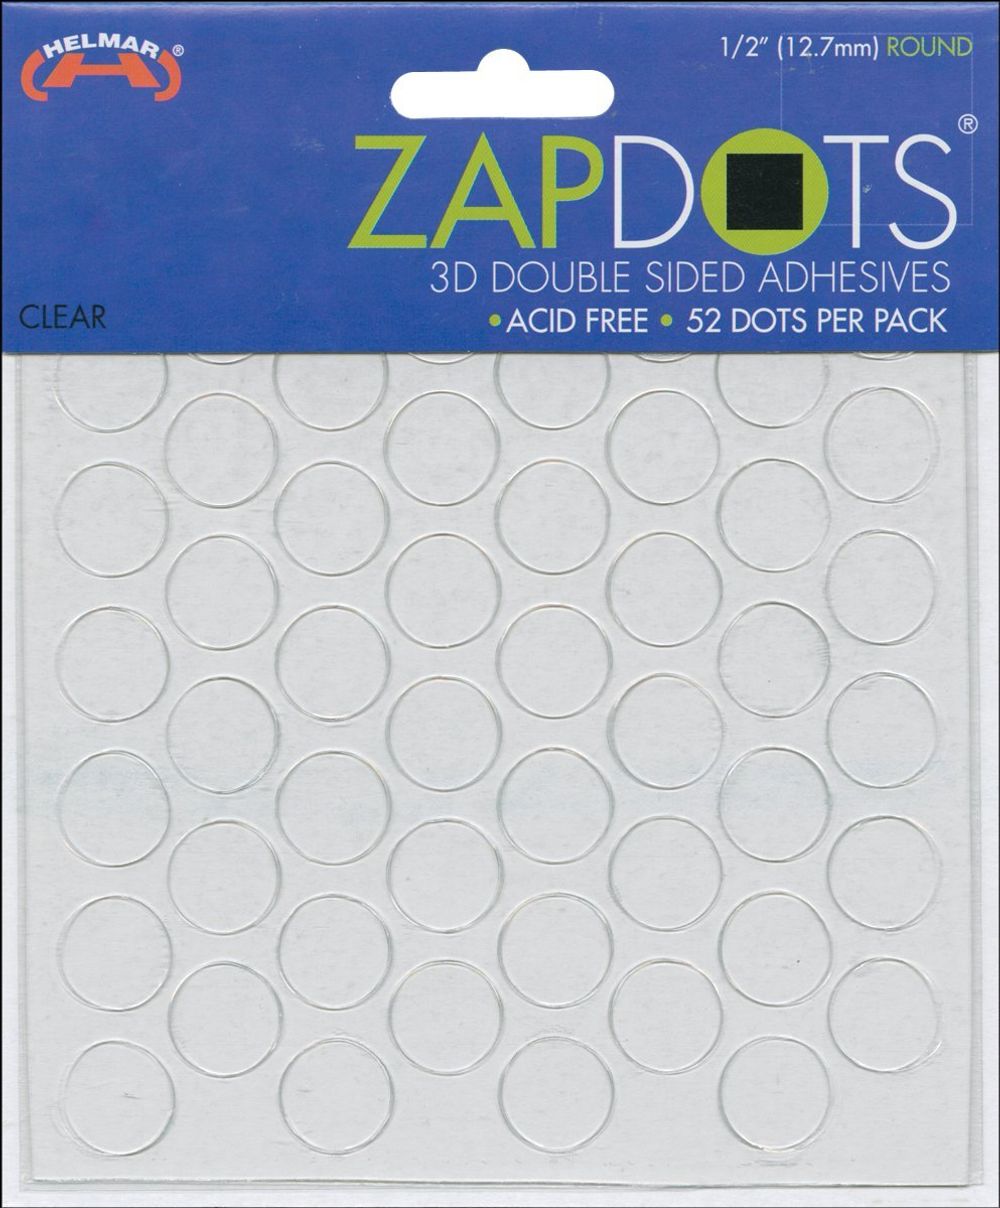 ZAPDOTS 3D DOUBLE CLEAR ADHESIVBE DOTS 1/2 " 12.7 MM